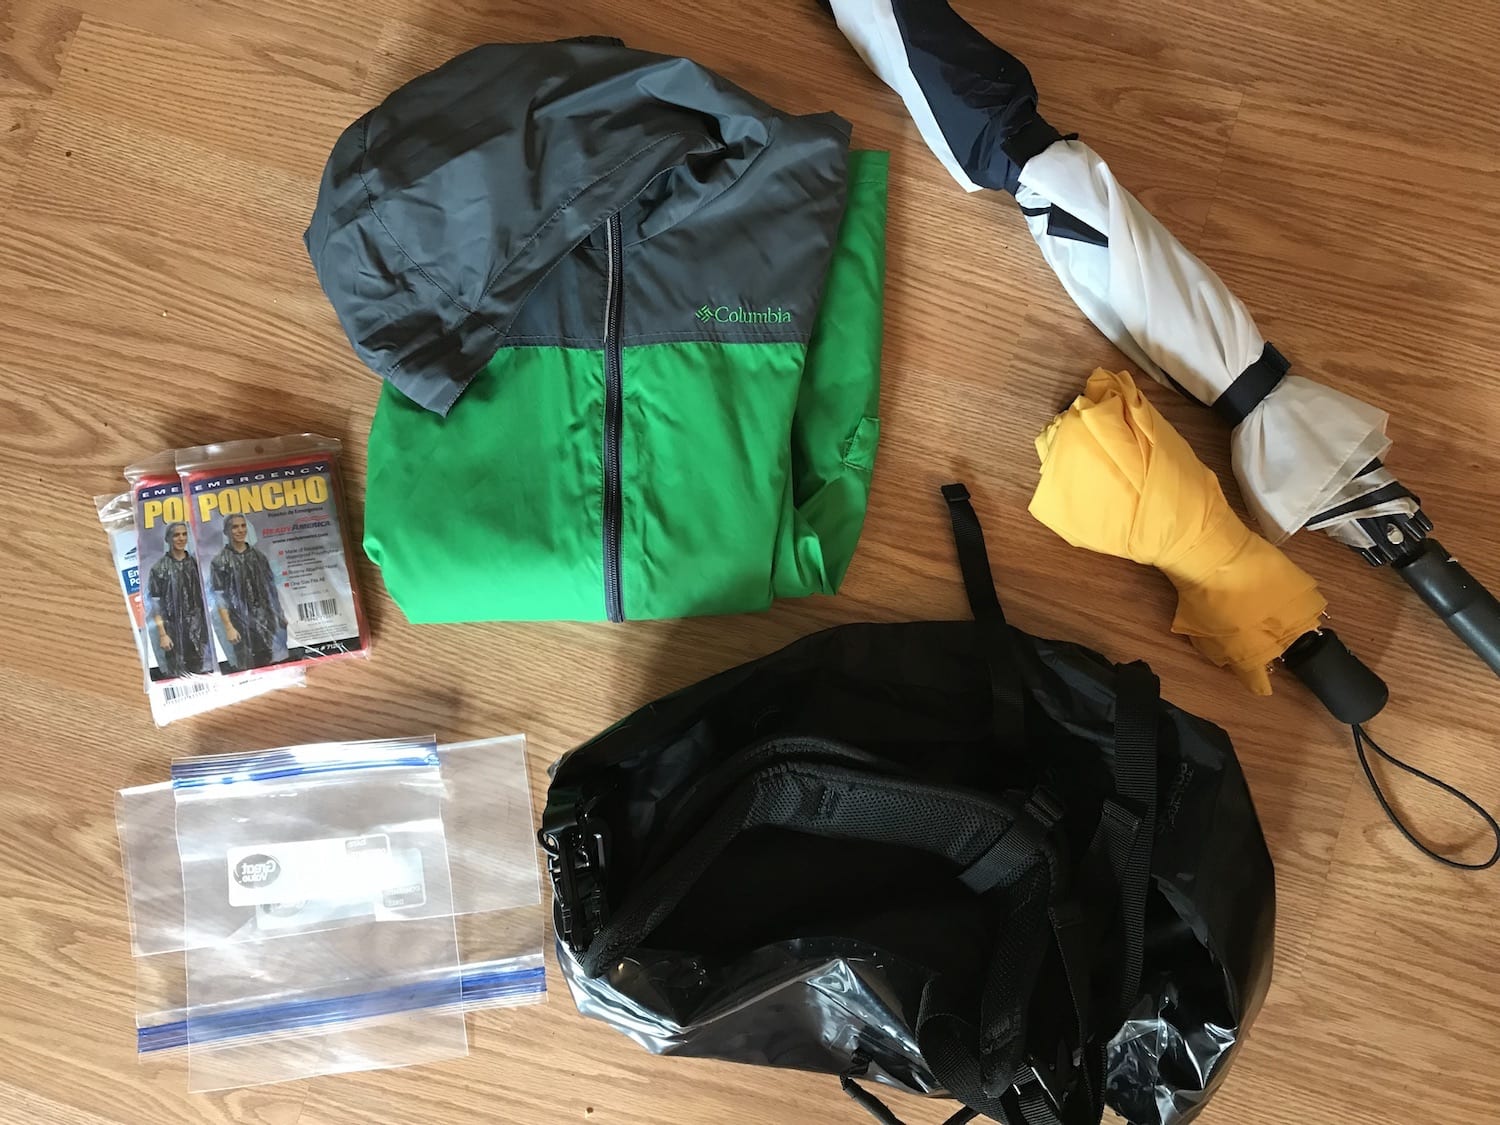 Things to pack for rainy day adventures